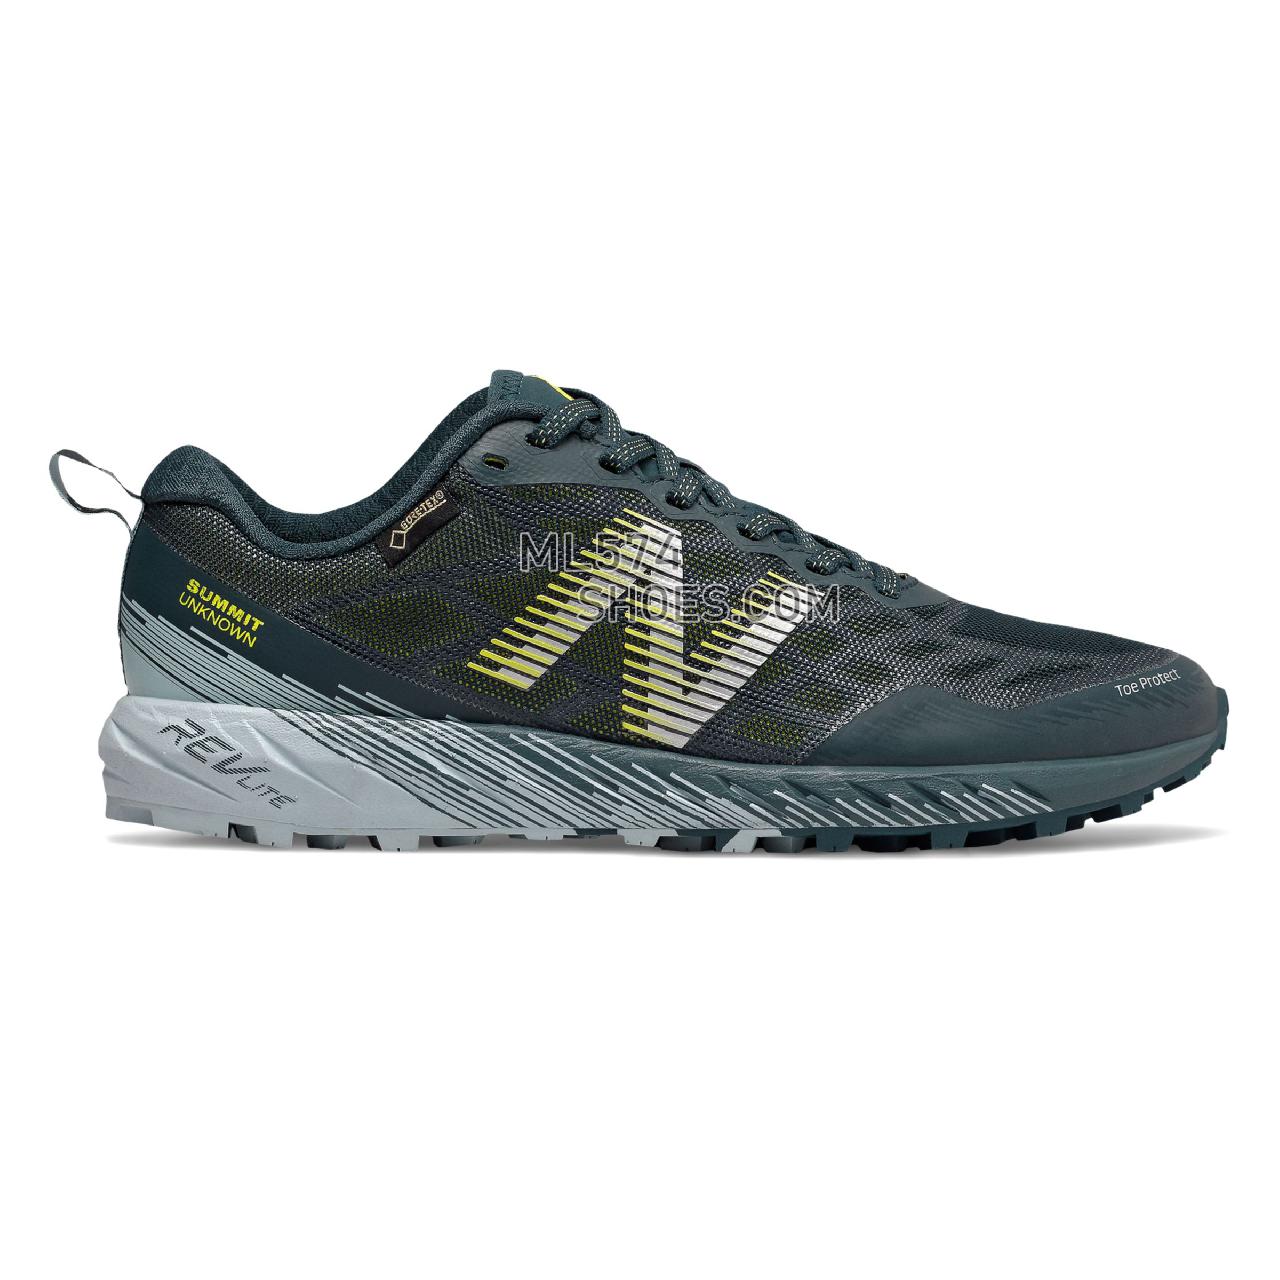 New Balance Summit Unknown GTX - Women's Trail Running - Supercell with Winter Sky and Sulphur Yellow - WTUNKNGT